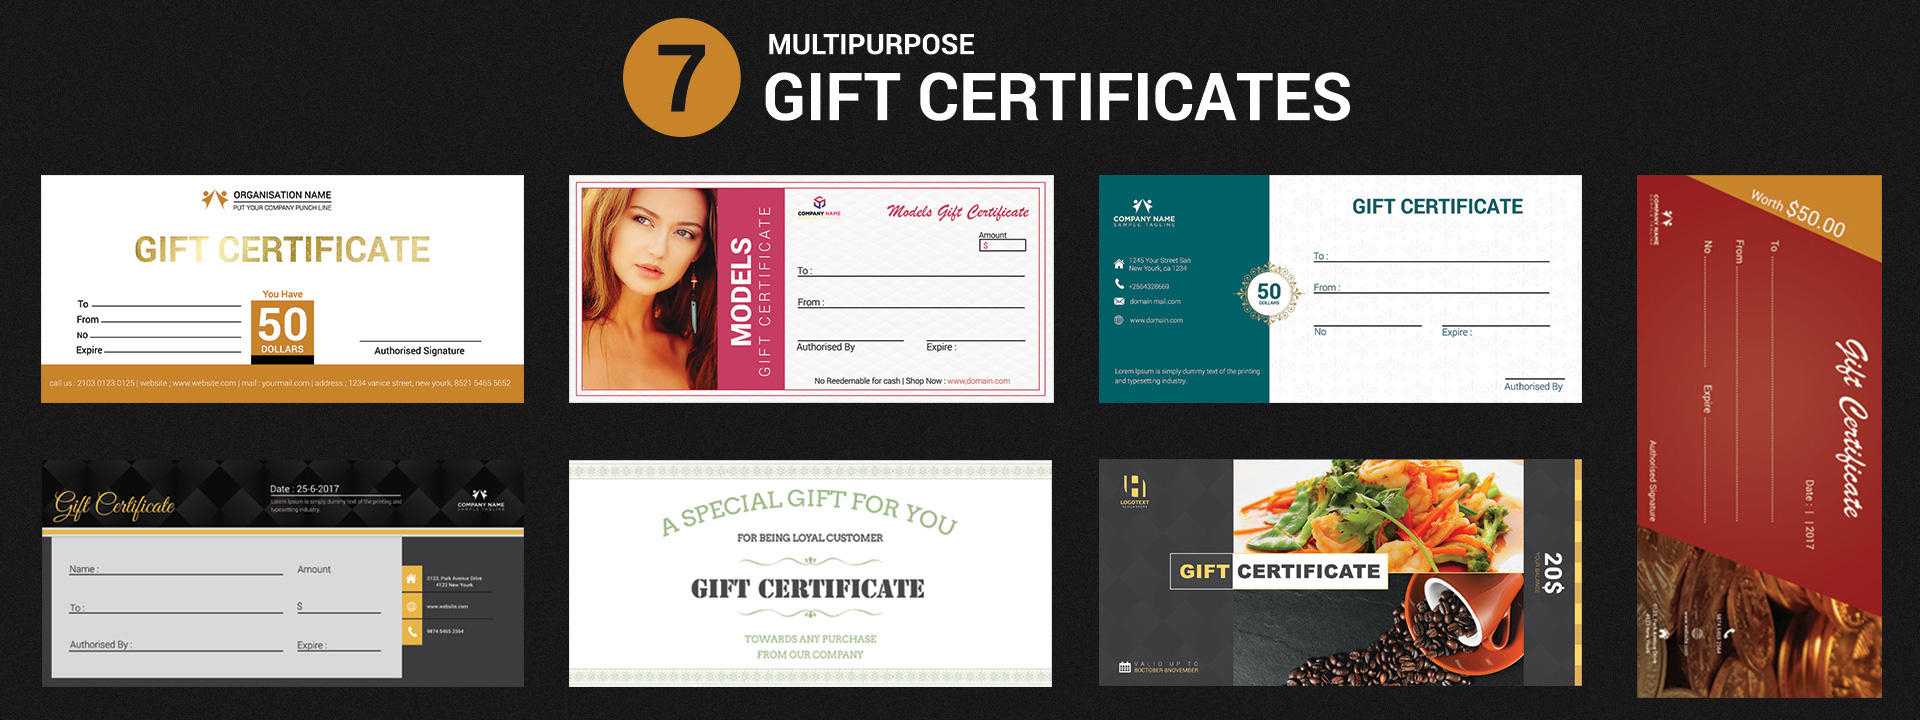 7+ Free Gift Certificate Templates – Birthday, Business, Spa With Regard To Gift Certificate Template Indesign